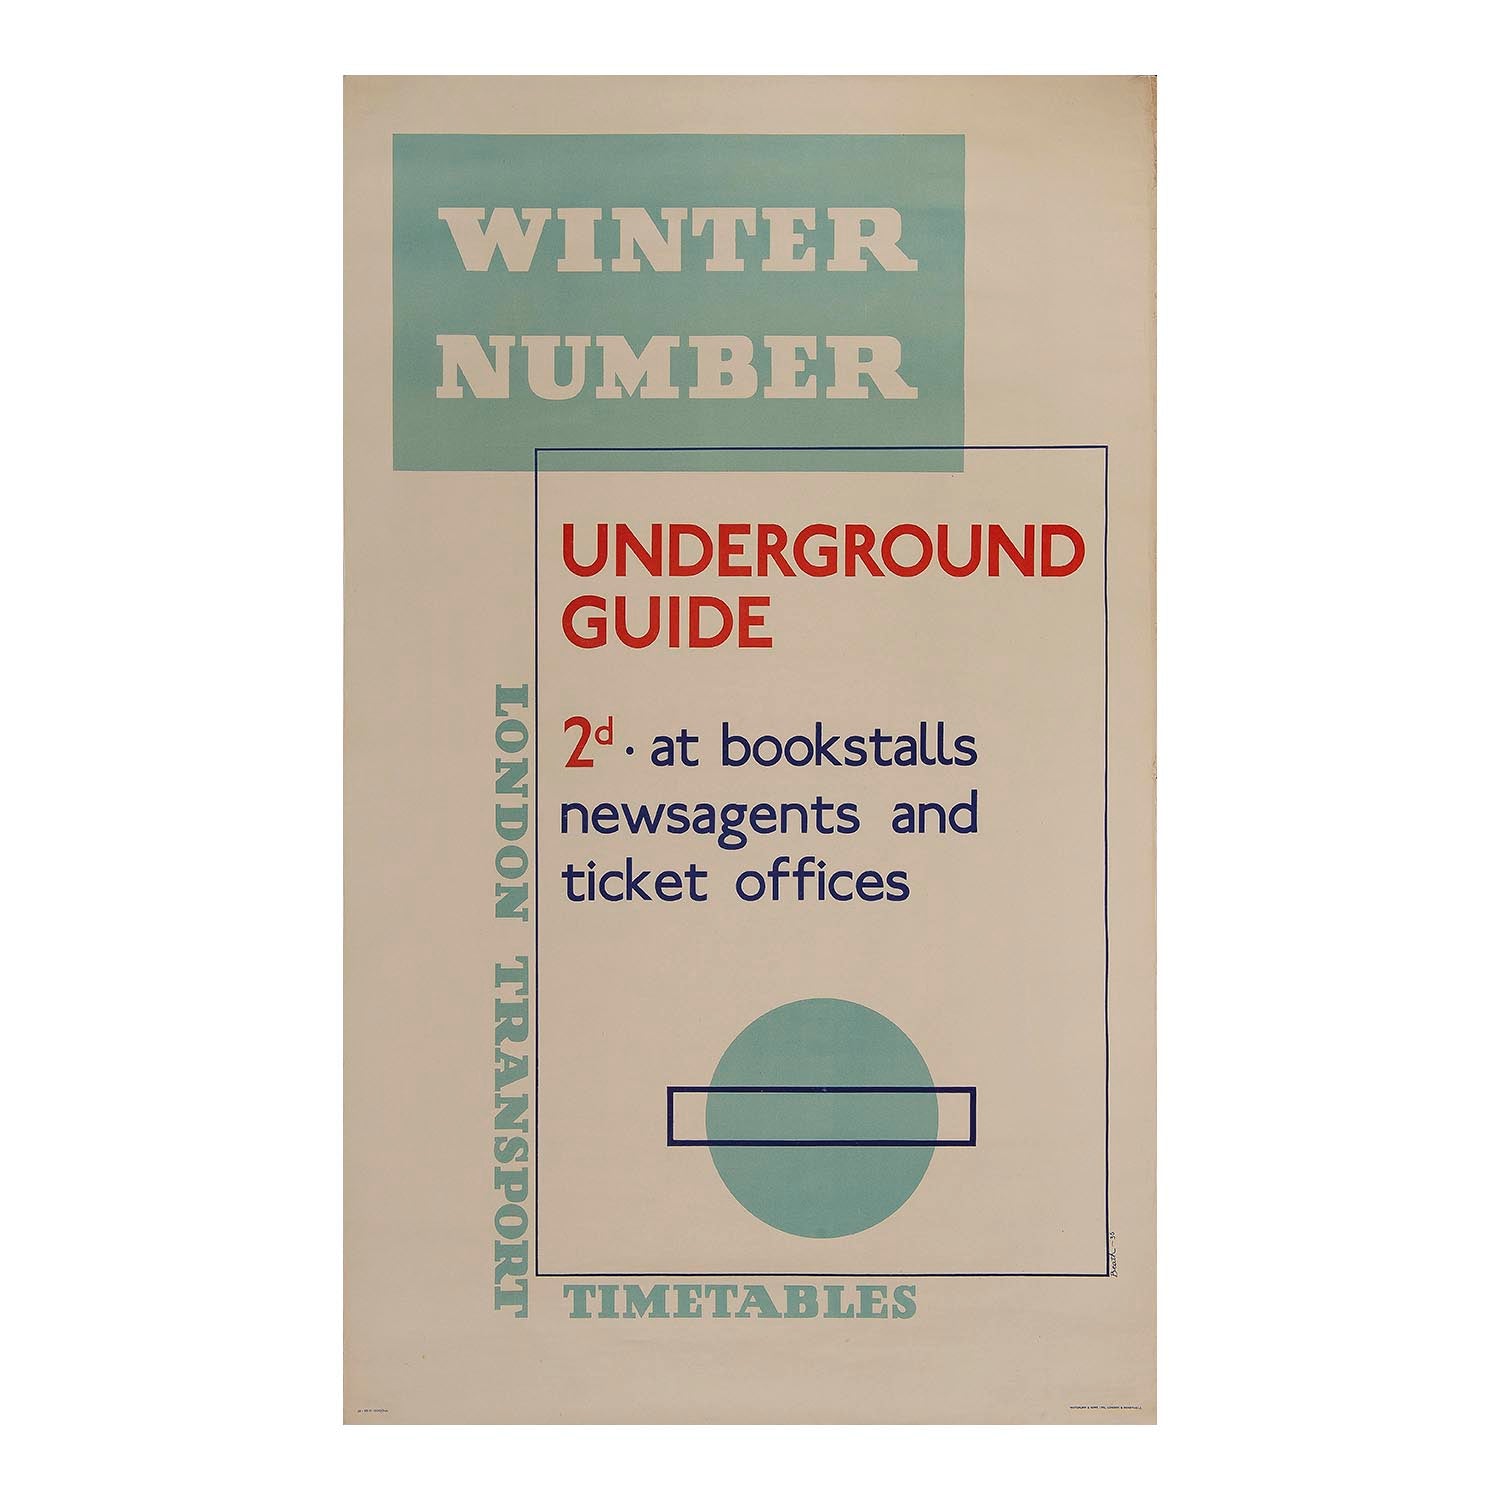 An original London Travel Transport poster, Underground Guide, Winter Number, by the Scottish graphic designer ‘Beath’ (John Myles Fleming, 1913-1991). A modernist-inspired design of the TFL roundel, with text advertisement.  